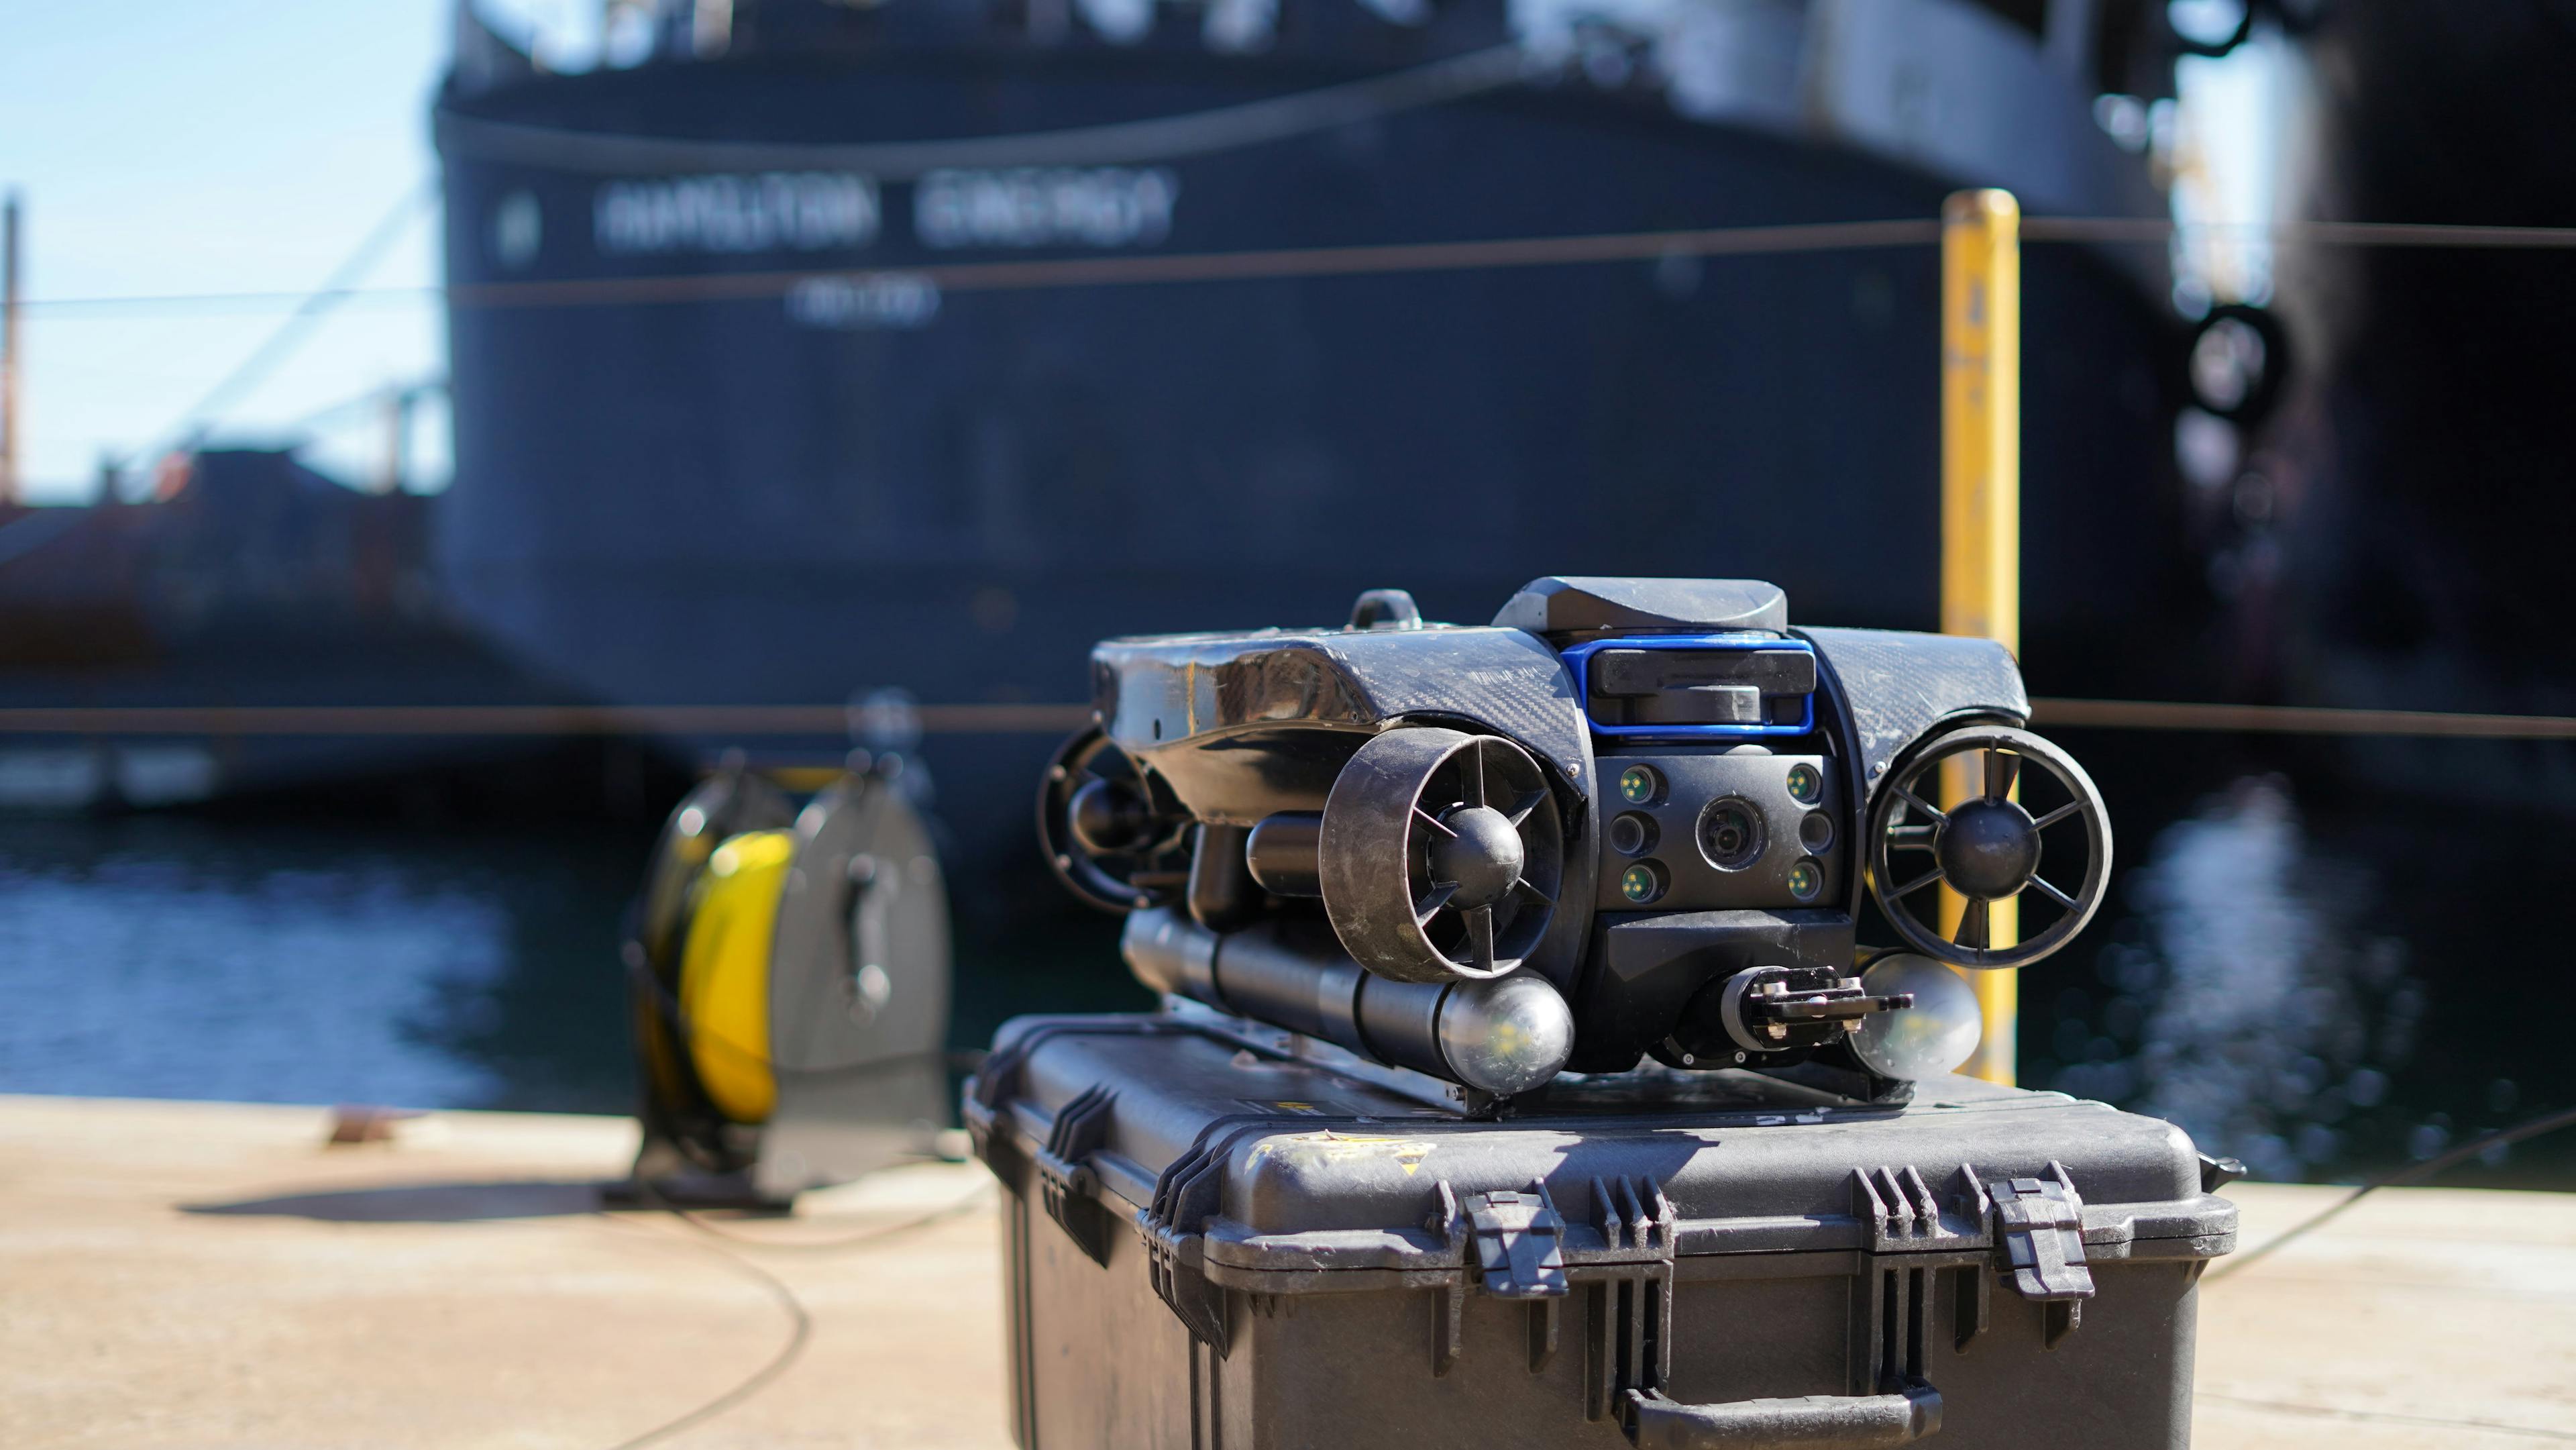 The Deep Trekker REVOLUTION ROV placed on a black box on a dock in front of a big blue ship 